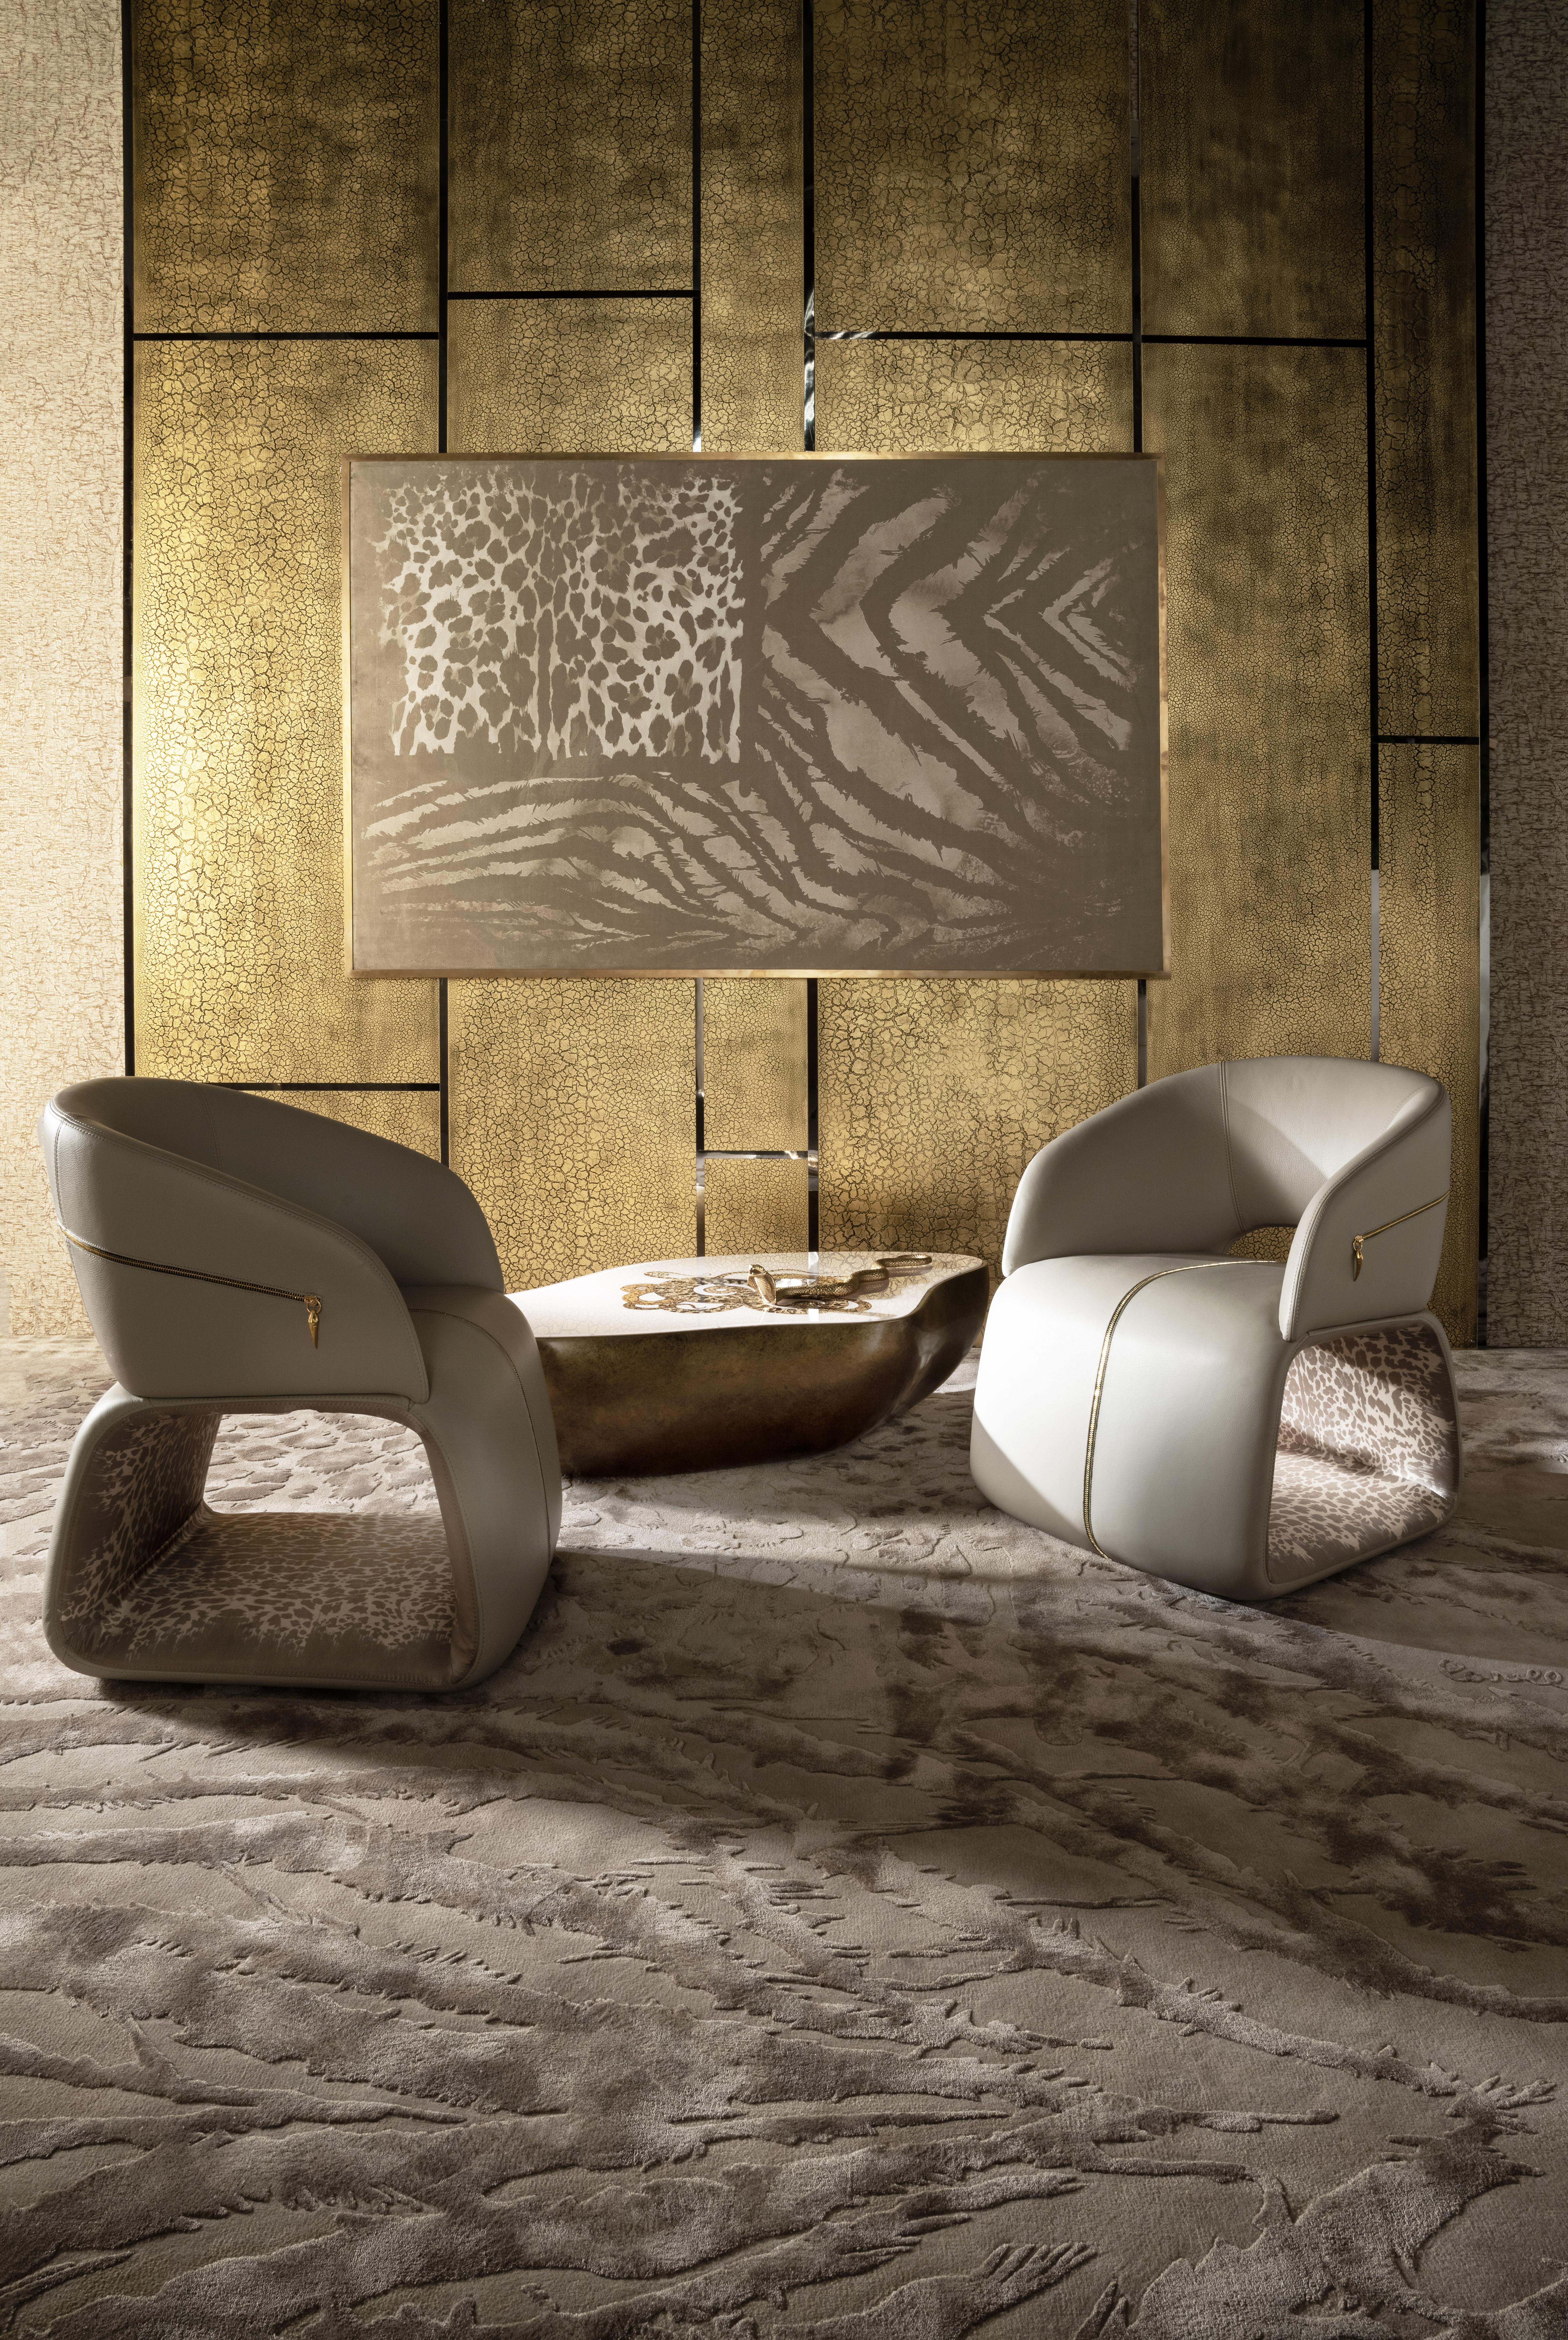 Contemporary 21st Century Wild Armchair in Leather by Roberto Cavalli Home Interiors For Sale